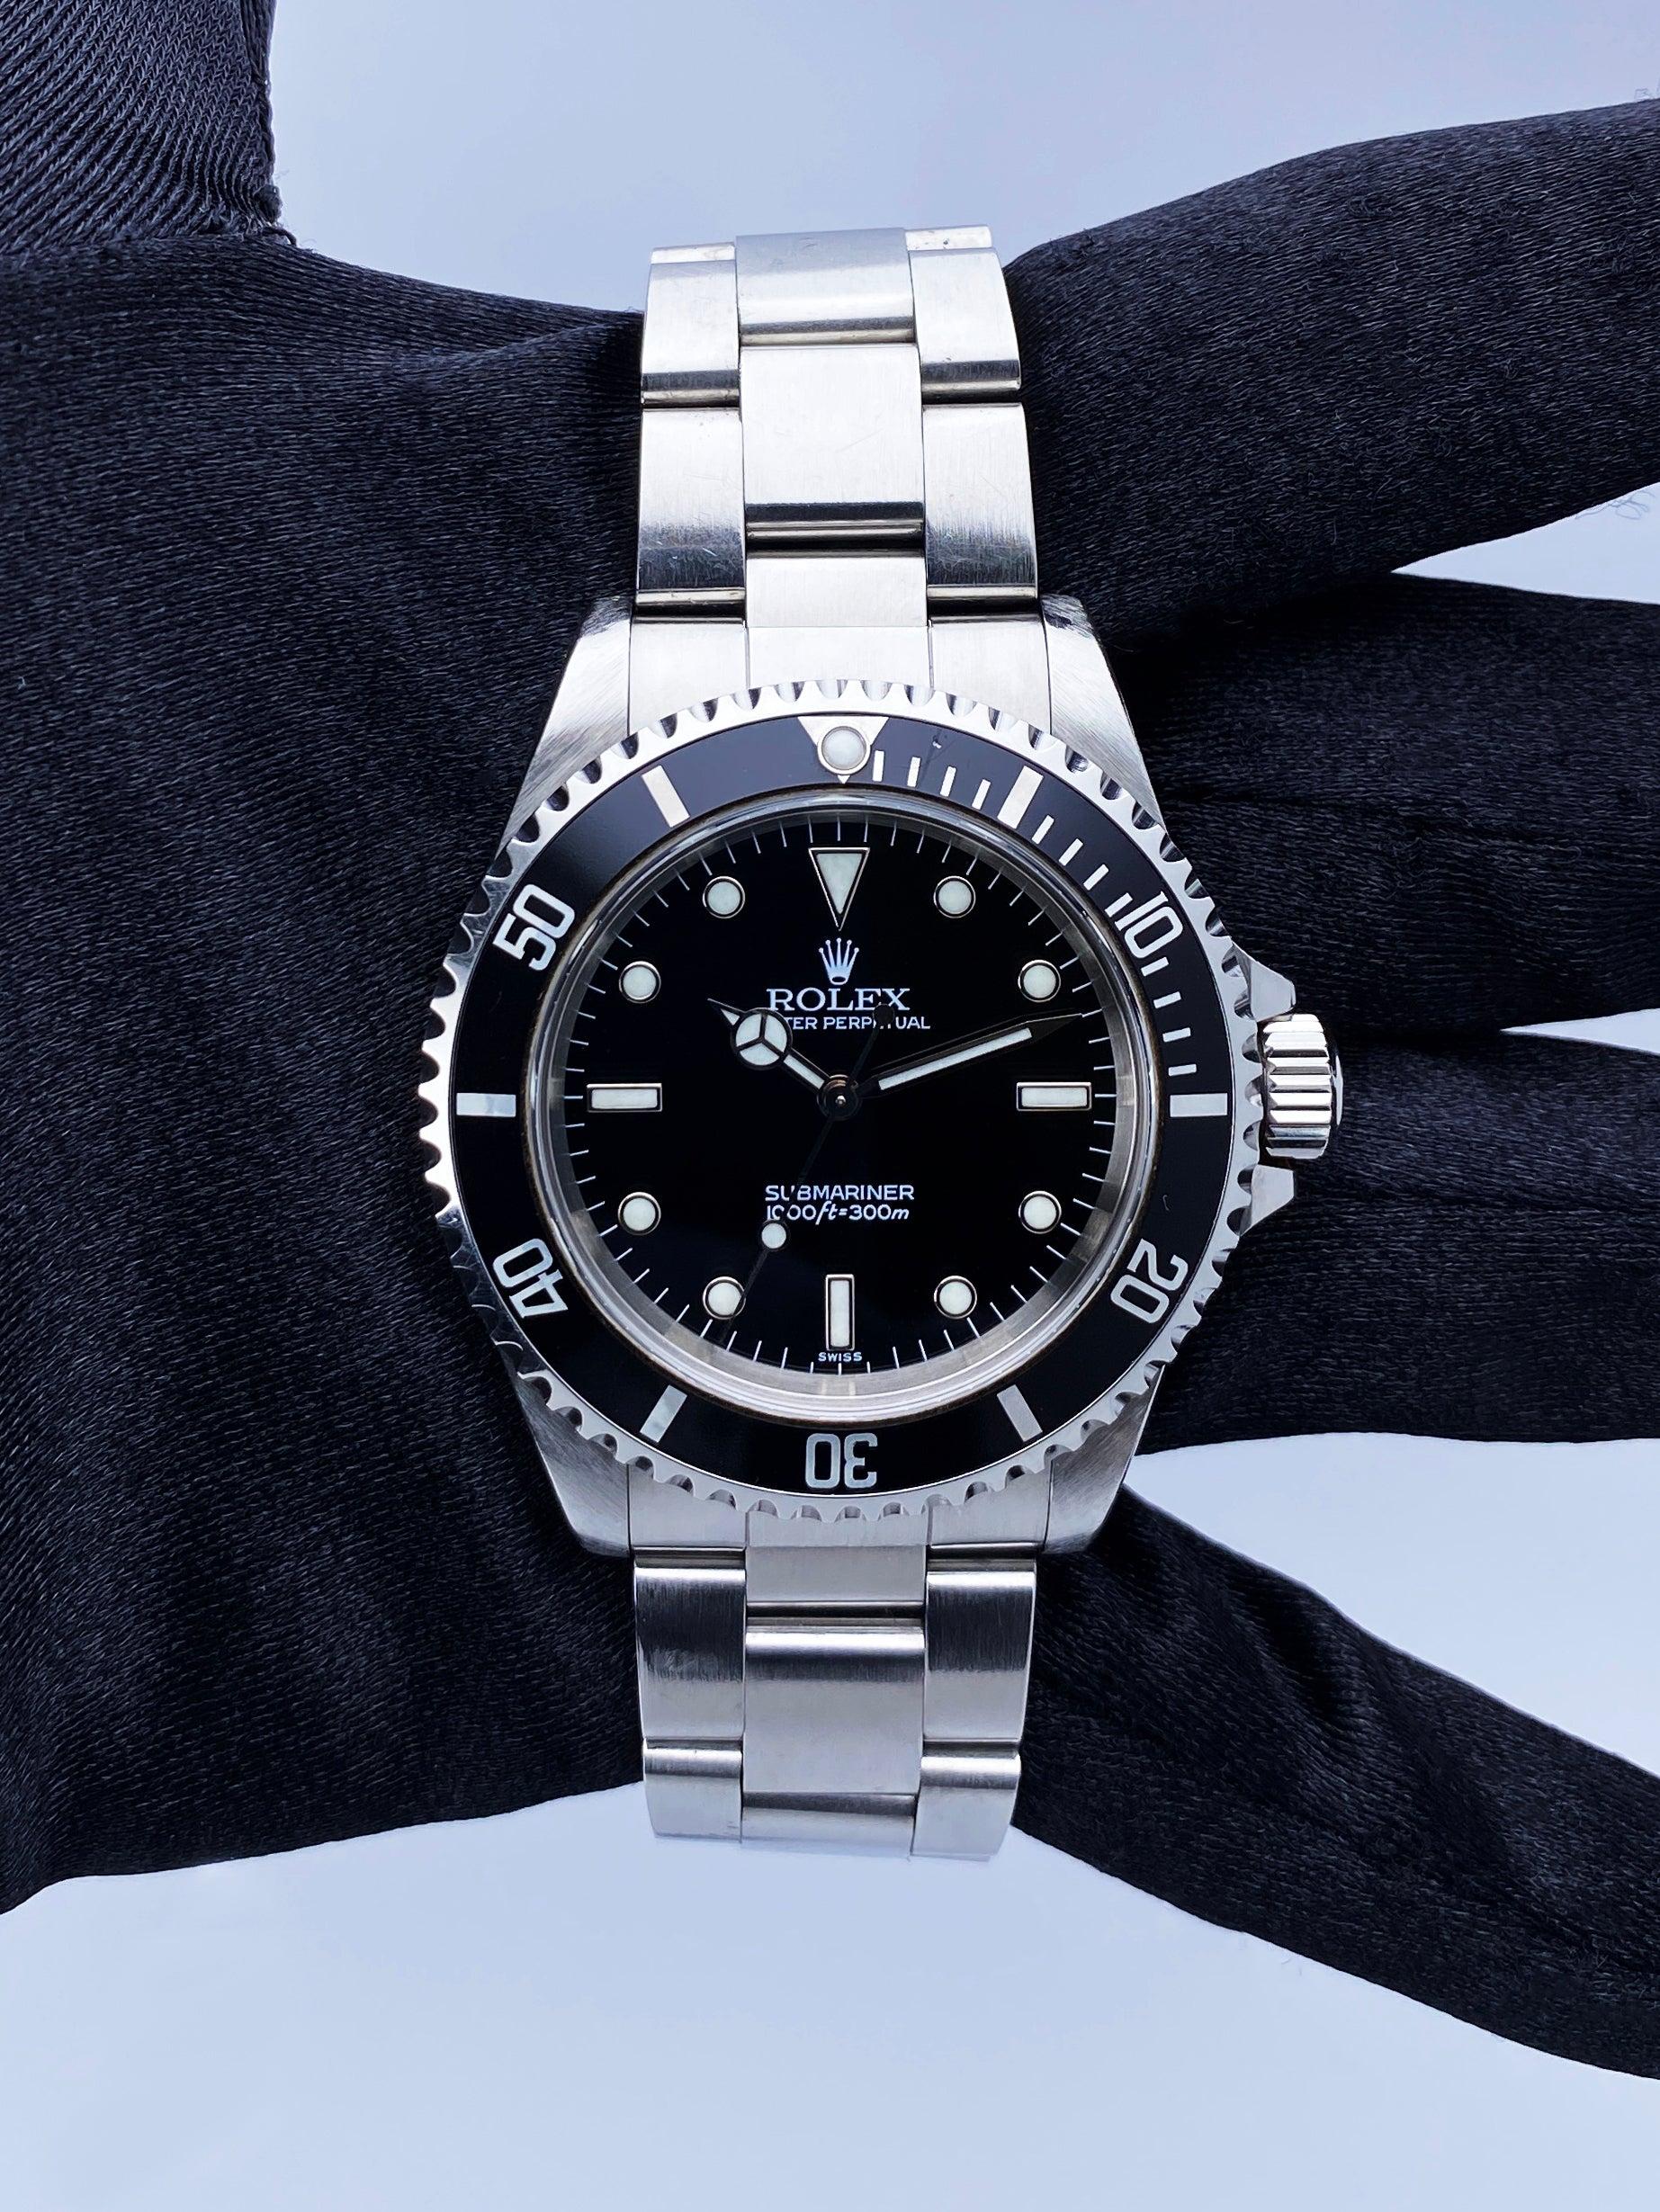 Rolex Oyster Perpetual Submariner No Date 14060 Mens Watch. 40mm stainless steel case. Unidirectional rotating bezel with black bezel insert. Black dial with luminous Mercedes steel hands and index hour marker. Stainless steel Oyster bracelet with a